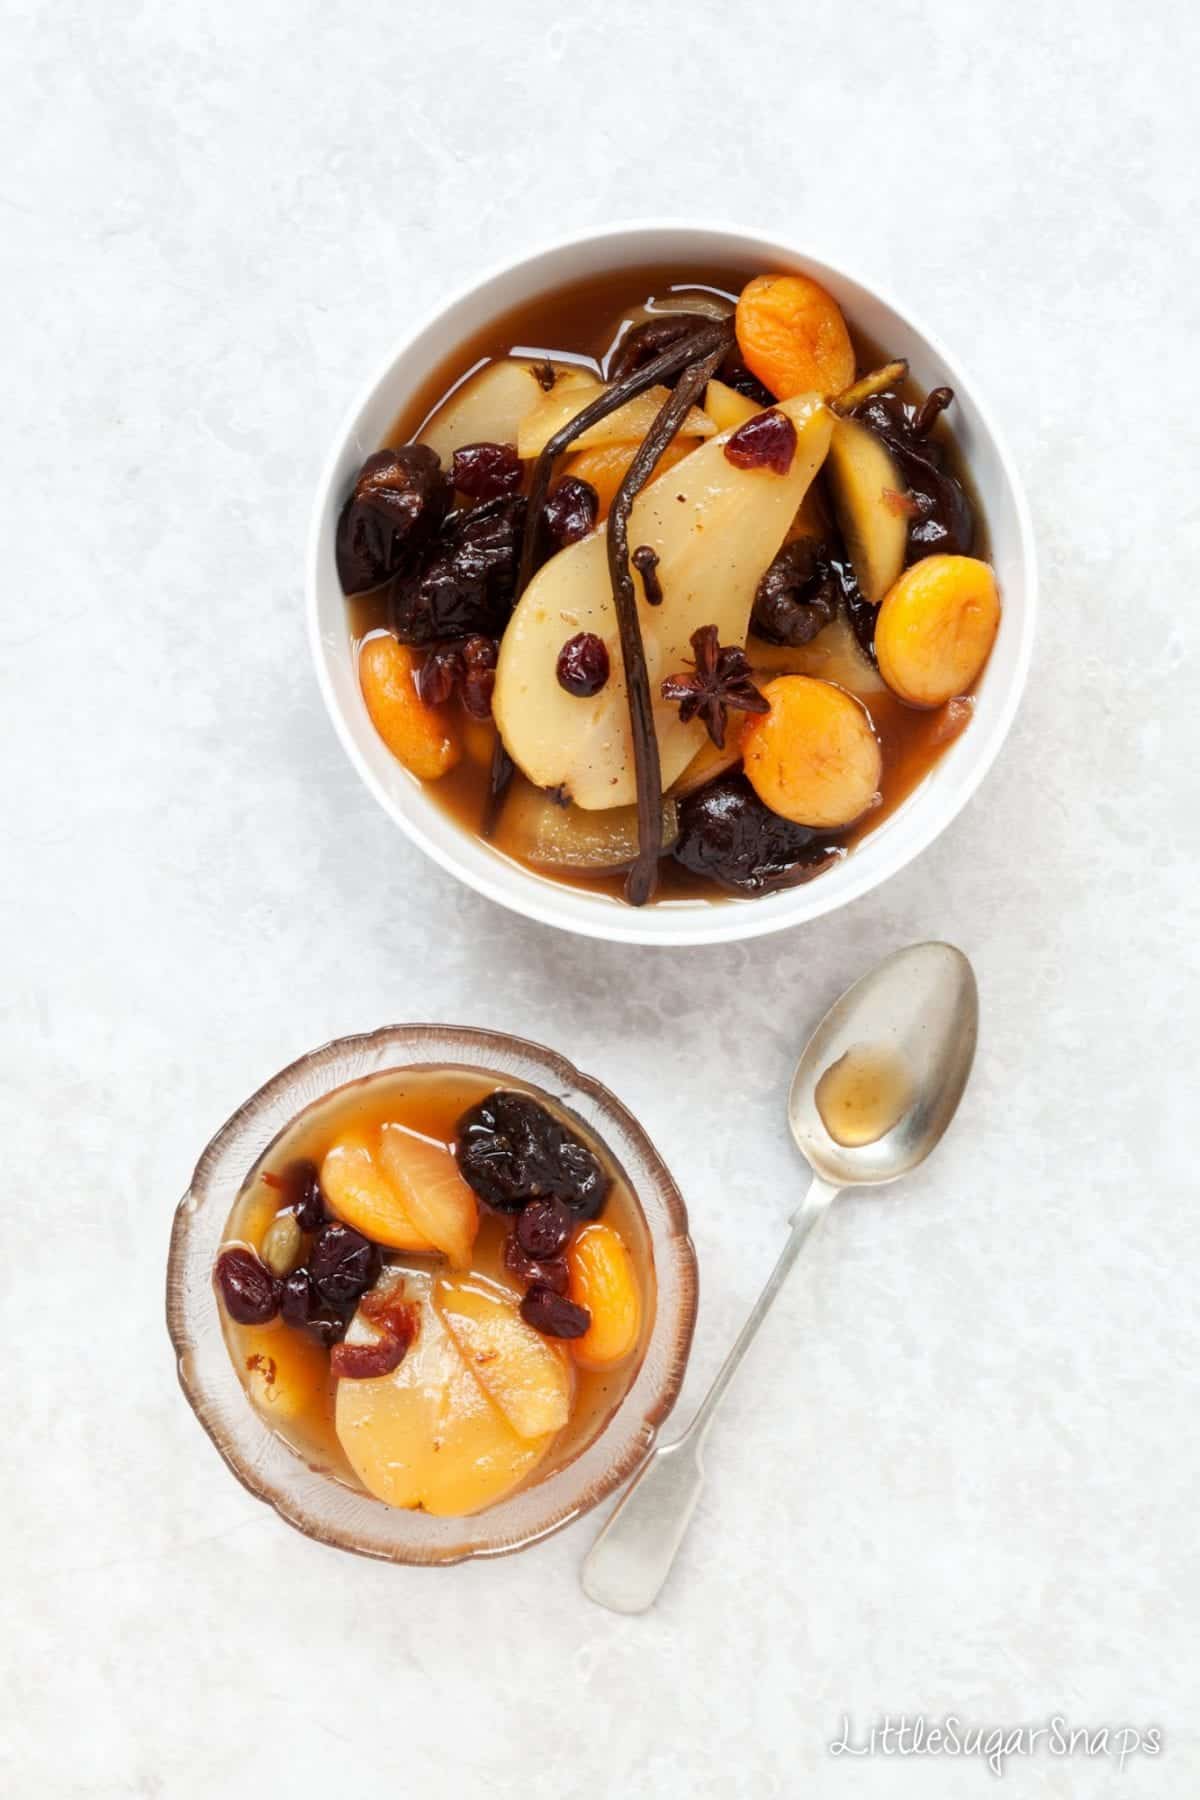 Spiced Fruit Compote including pears, prunes, cranberries and apricots